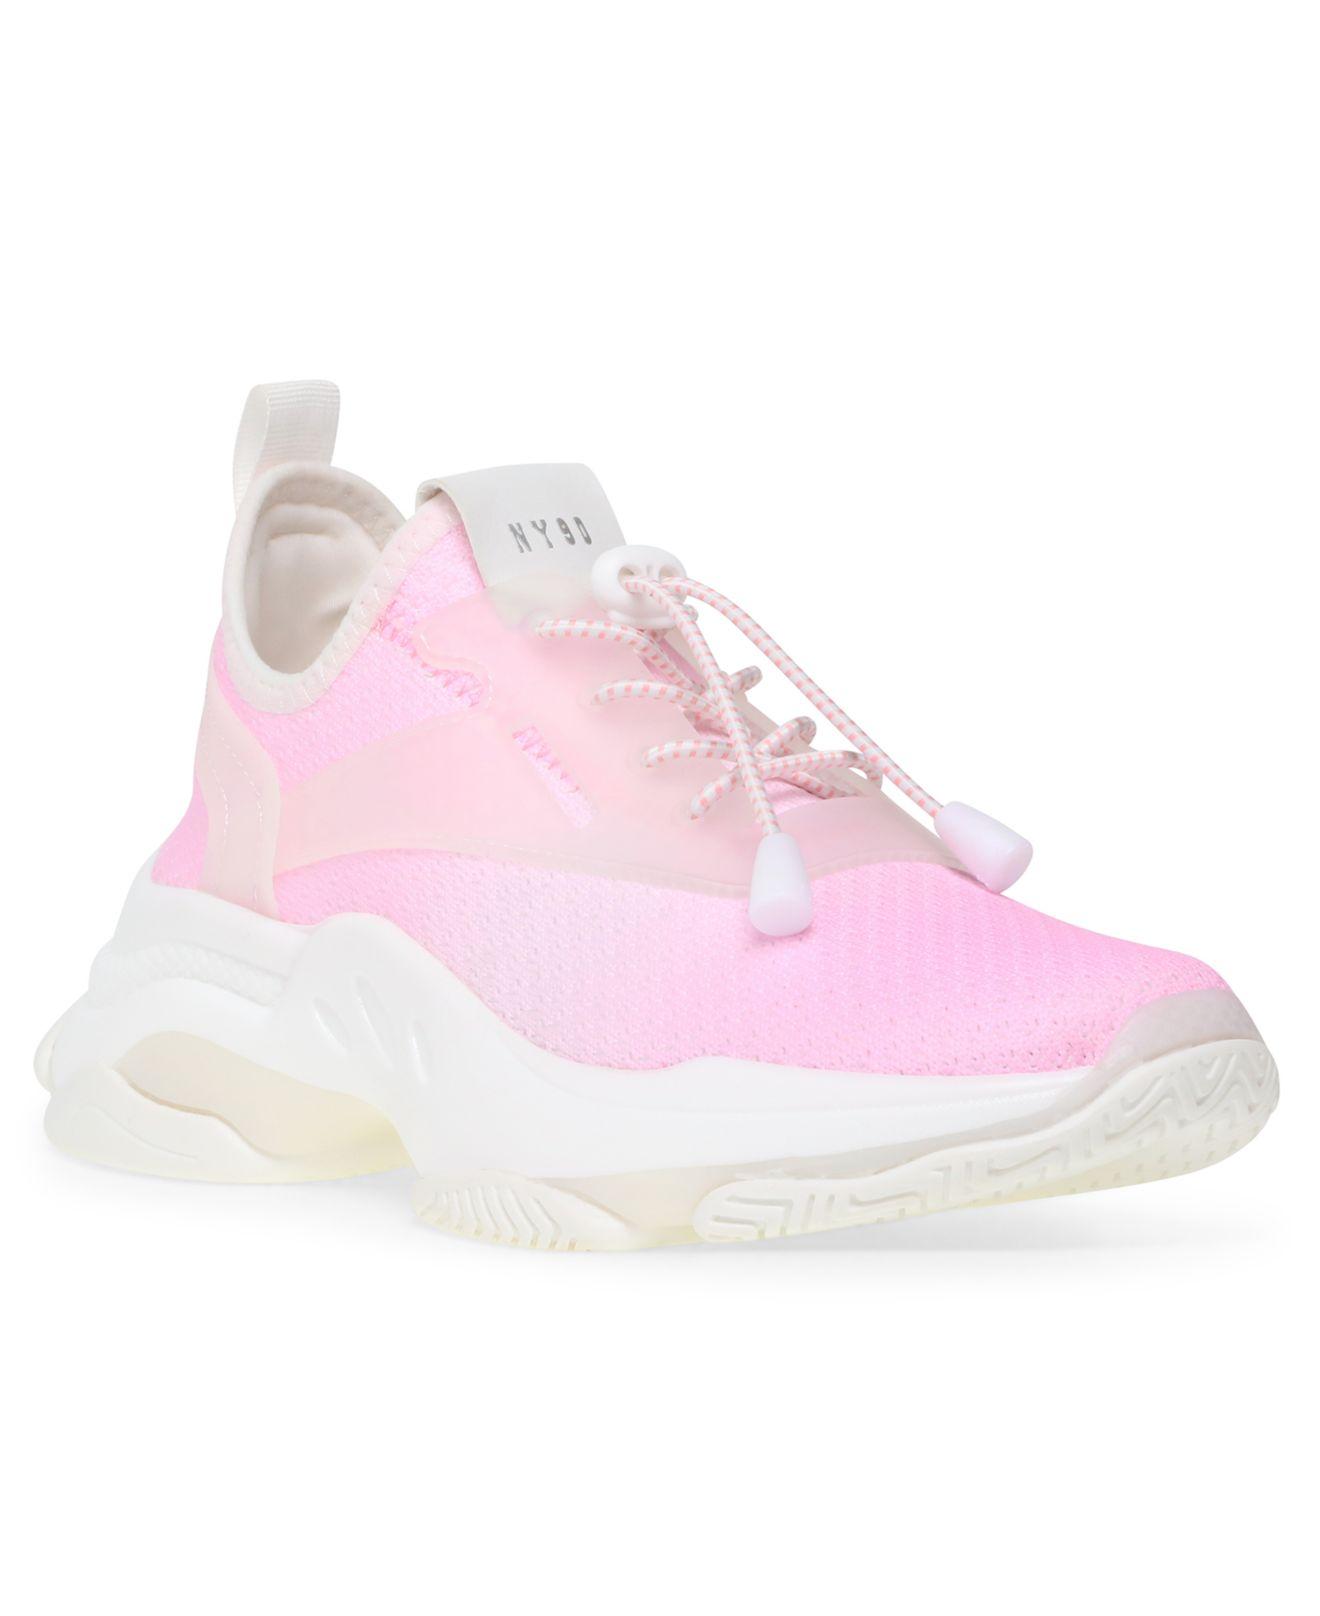 Steve Madden Myles Knit Chunky Sneakers in Pink | Lyst